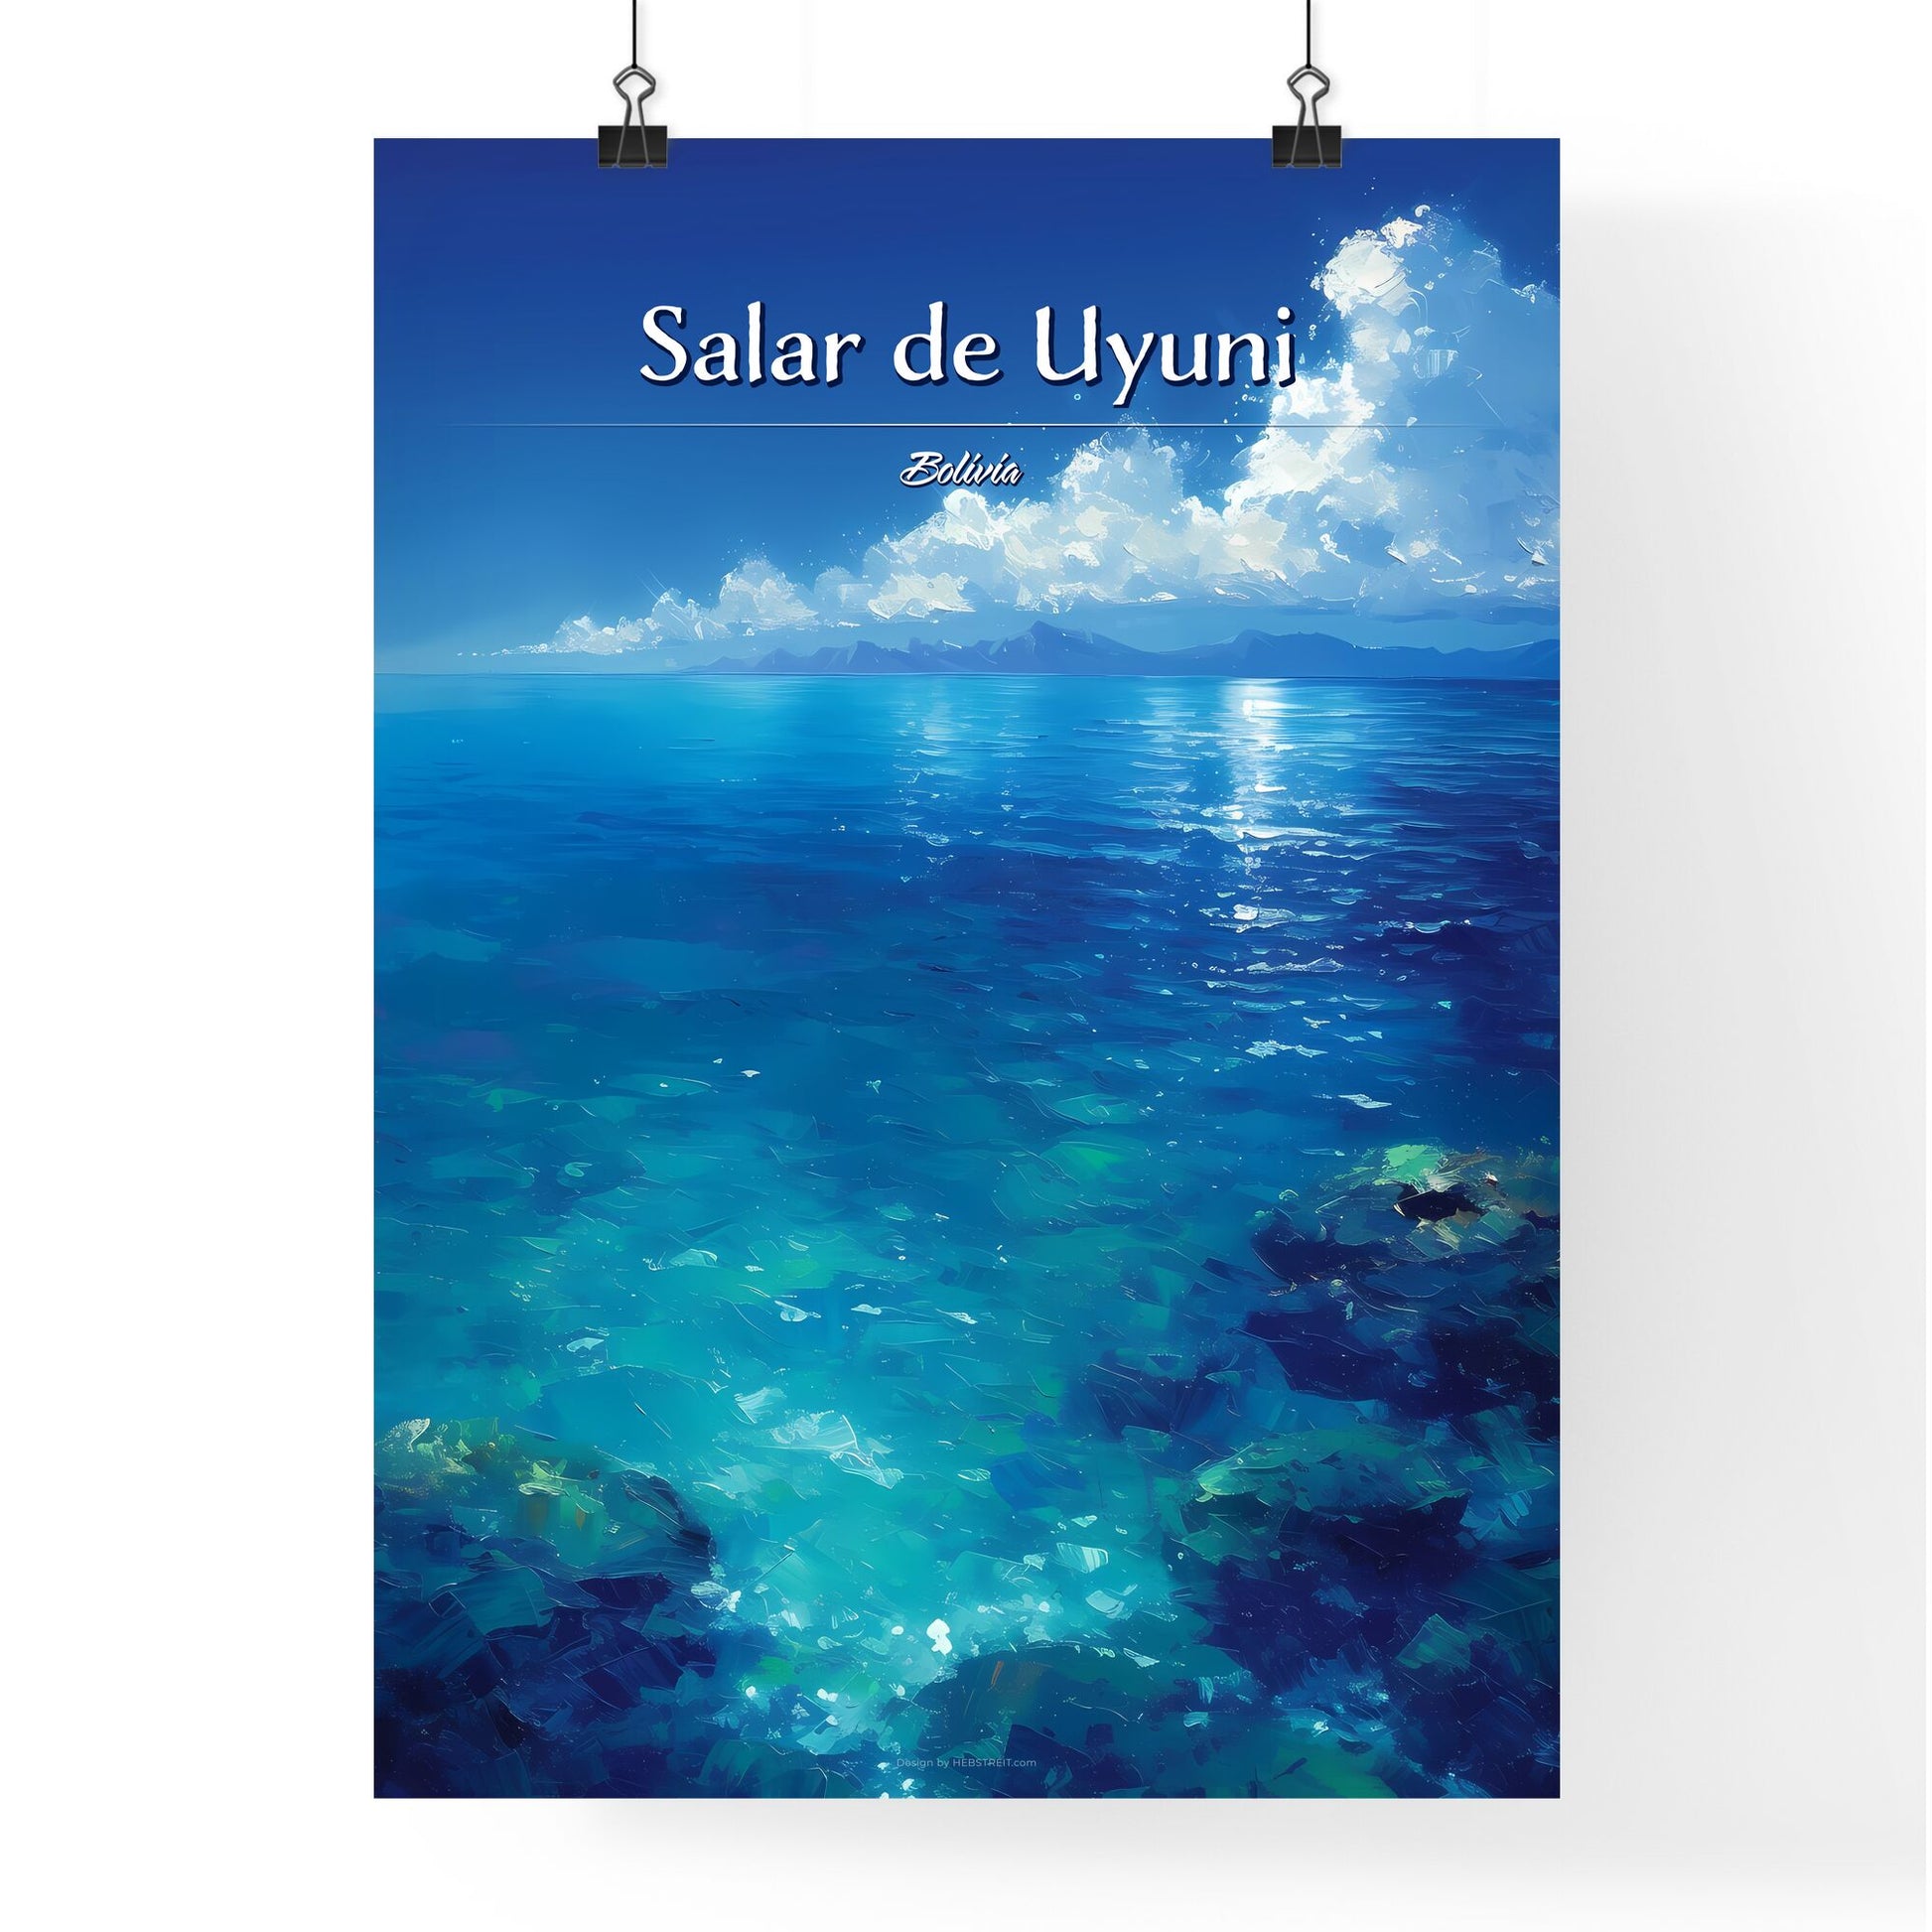 Salar de Uyuni, Bolivia - Art print of a blue ocean with rocks and clouds in the sky Default Title